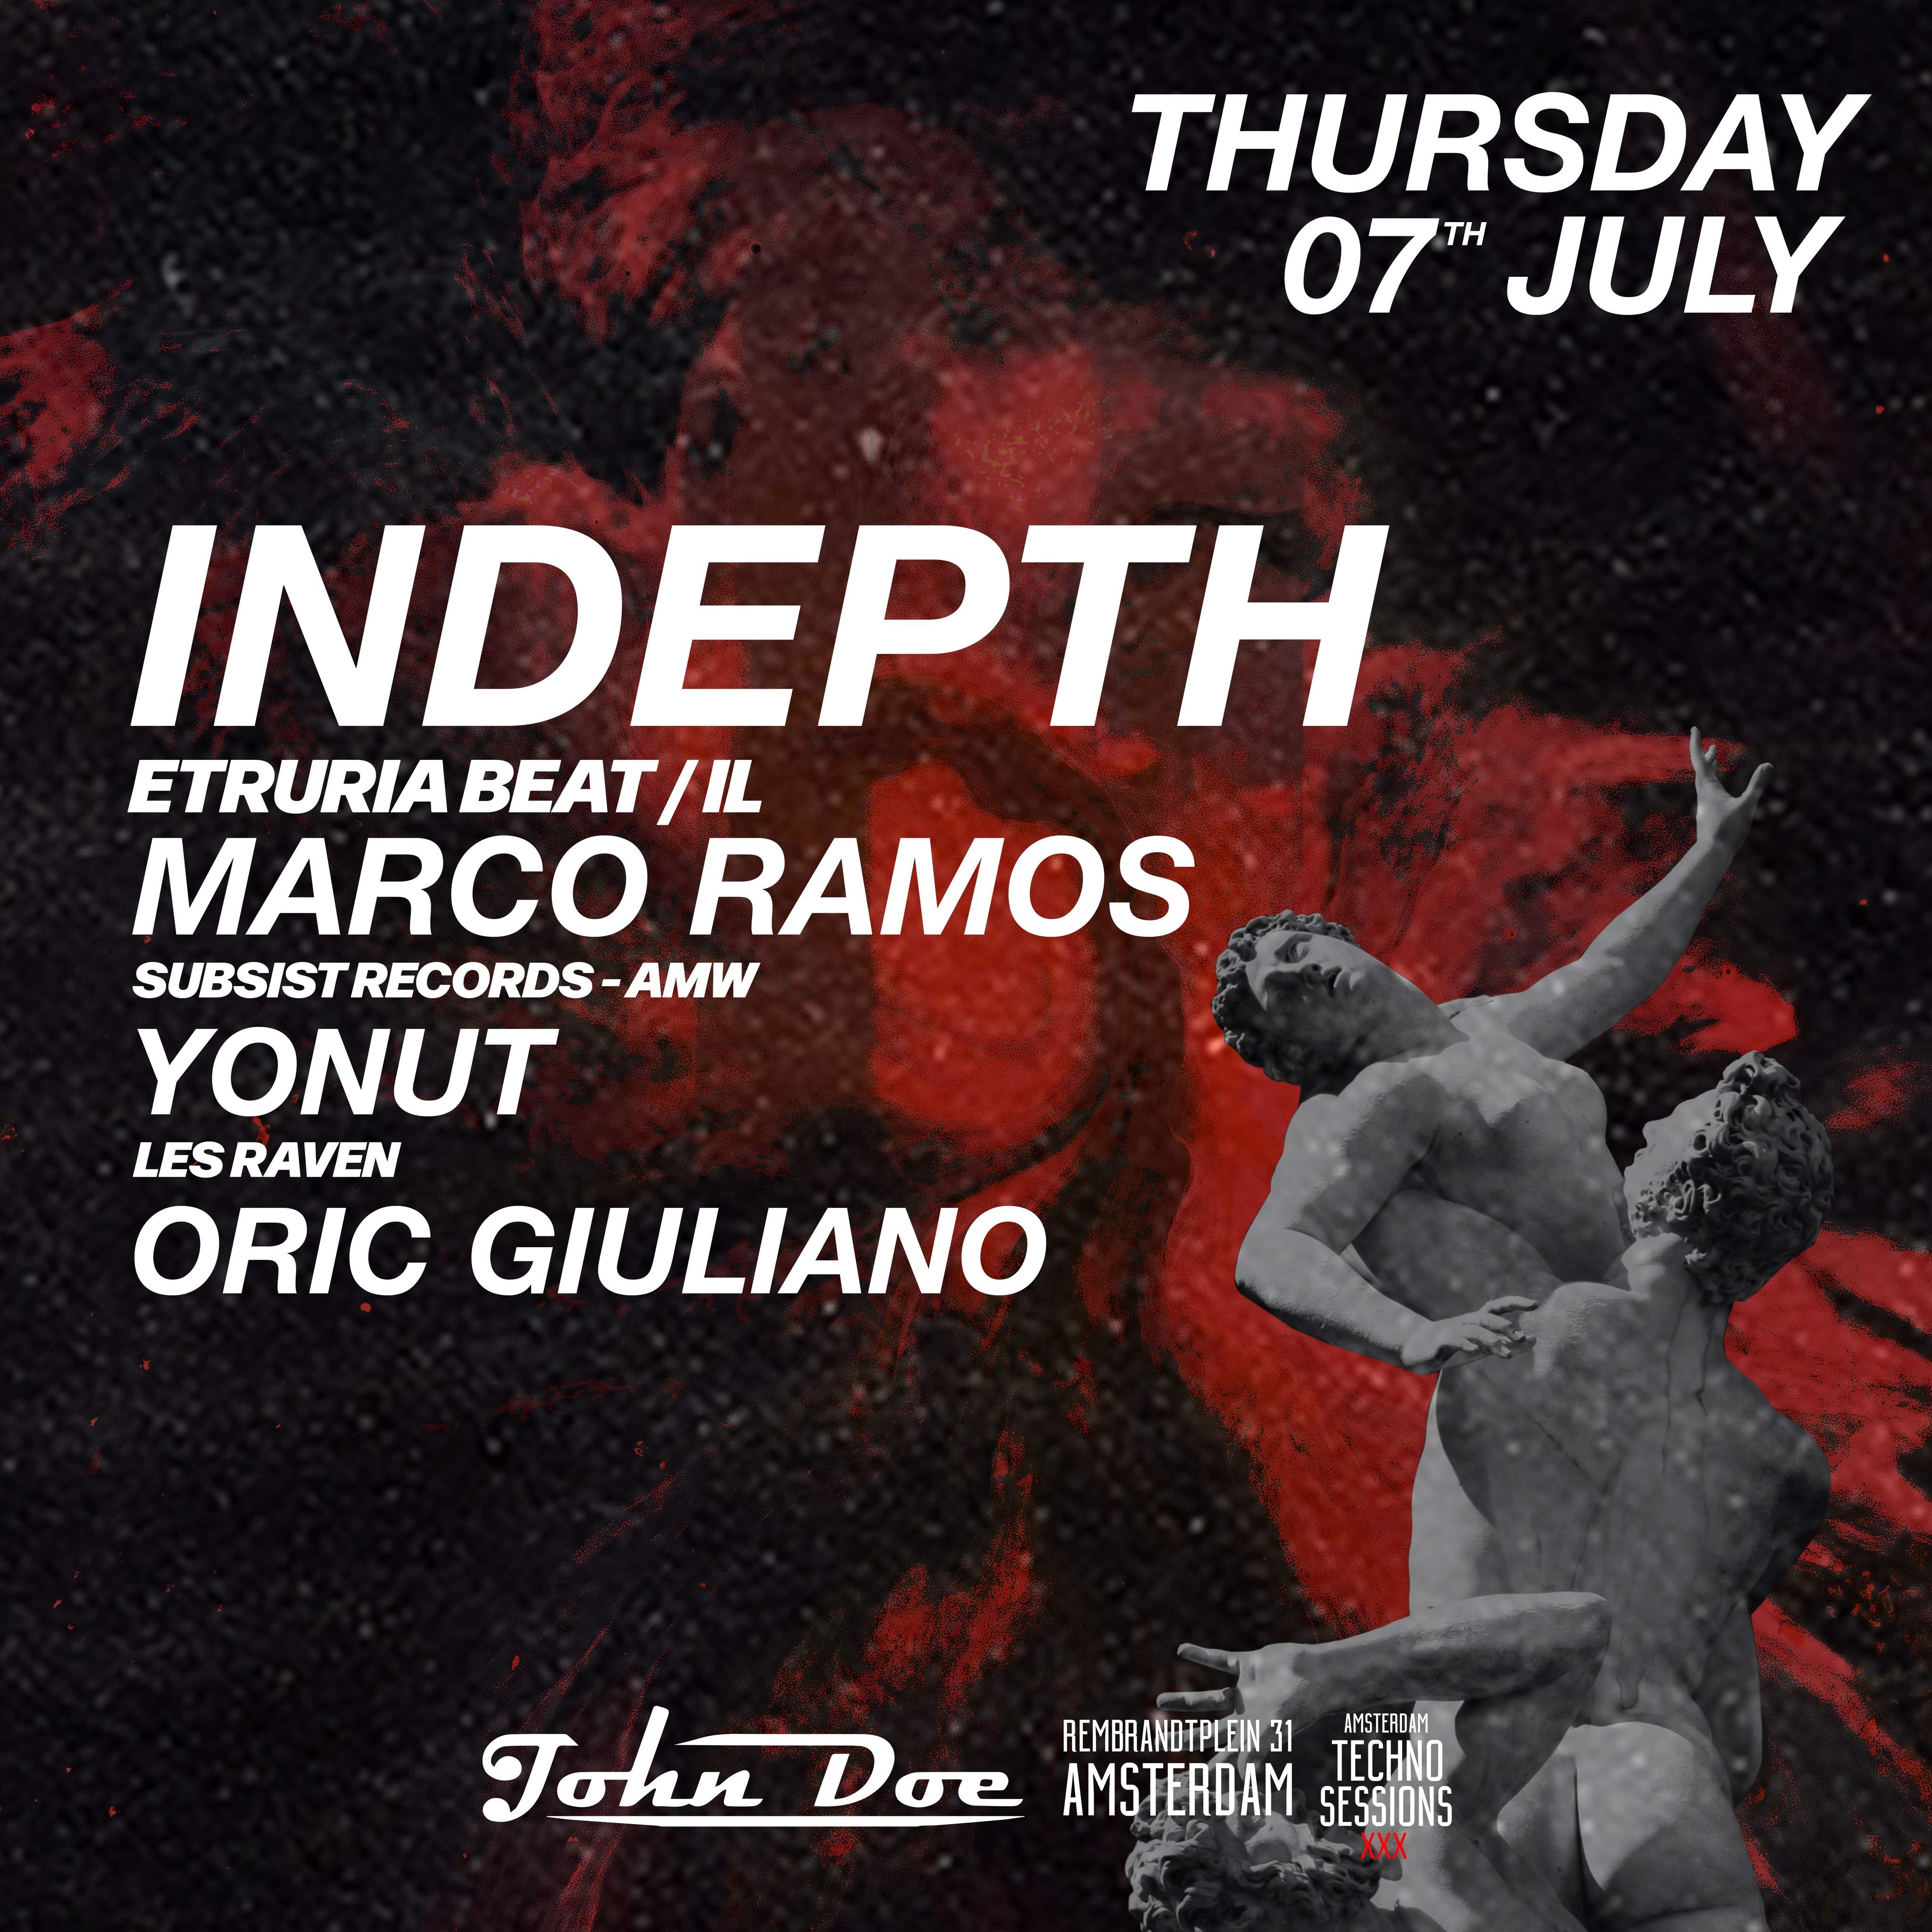 Amsterdam Techno Sessions w/ Indepth, Marco Ramos, Yonut & Oric - フライヤー裏